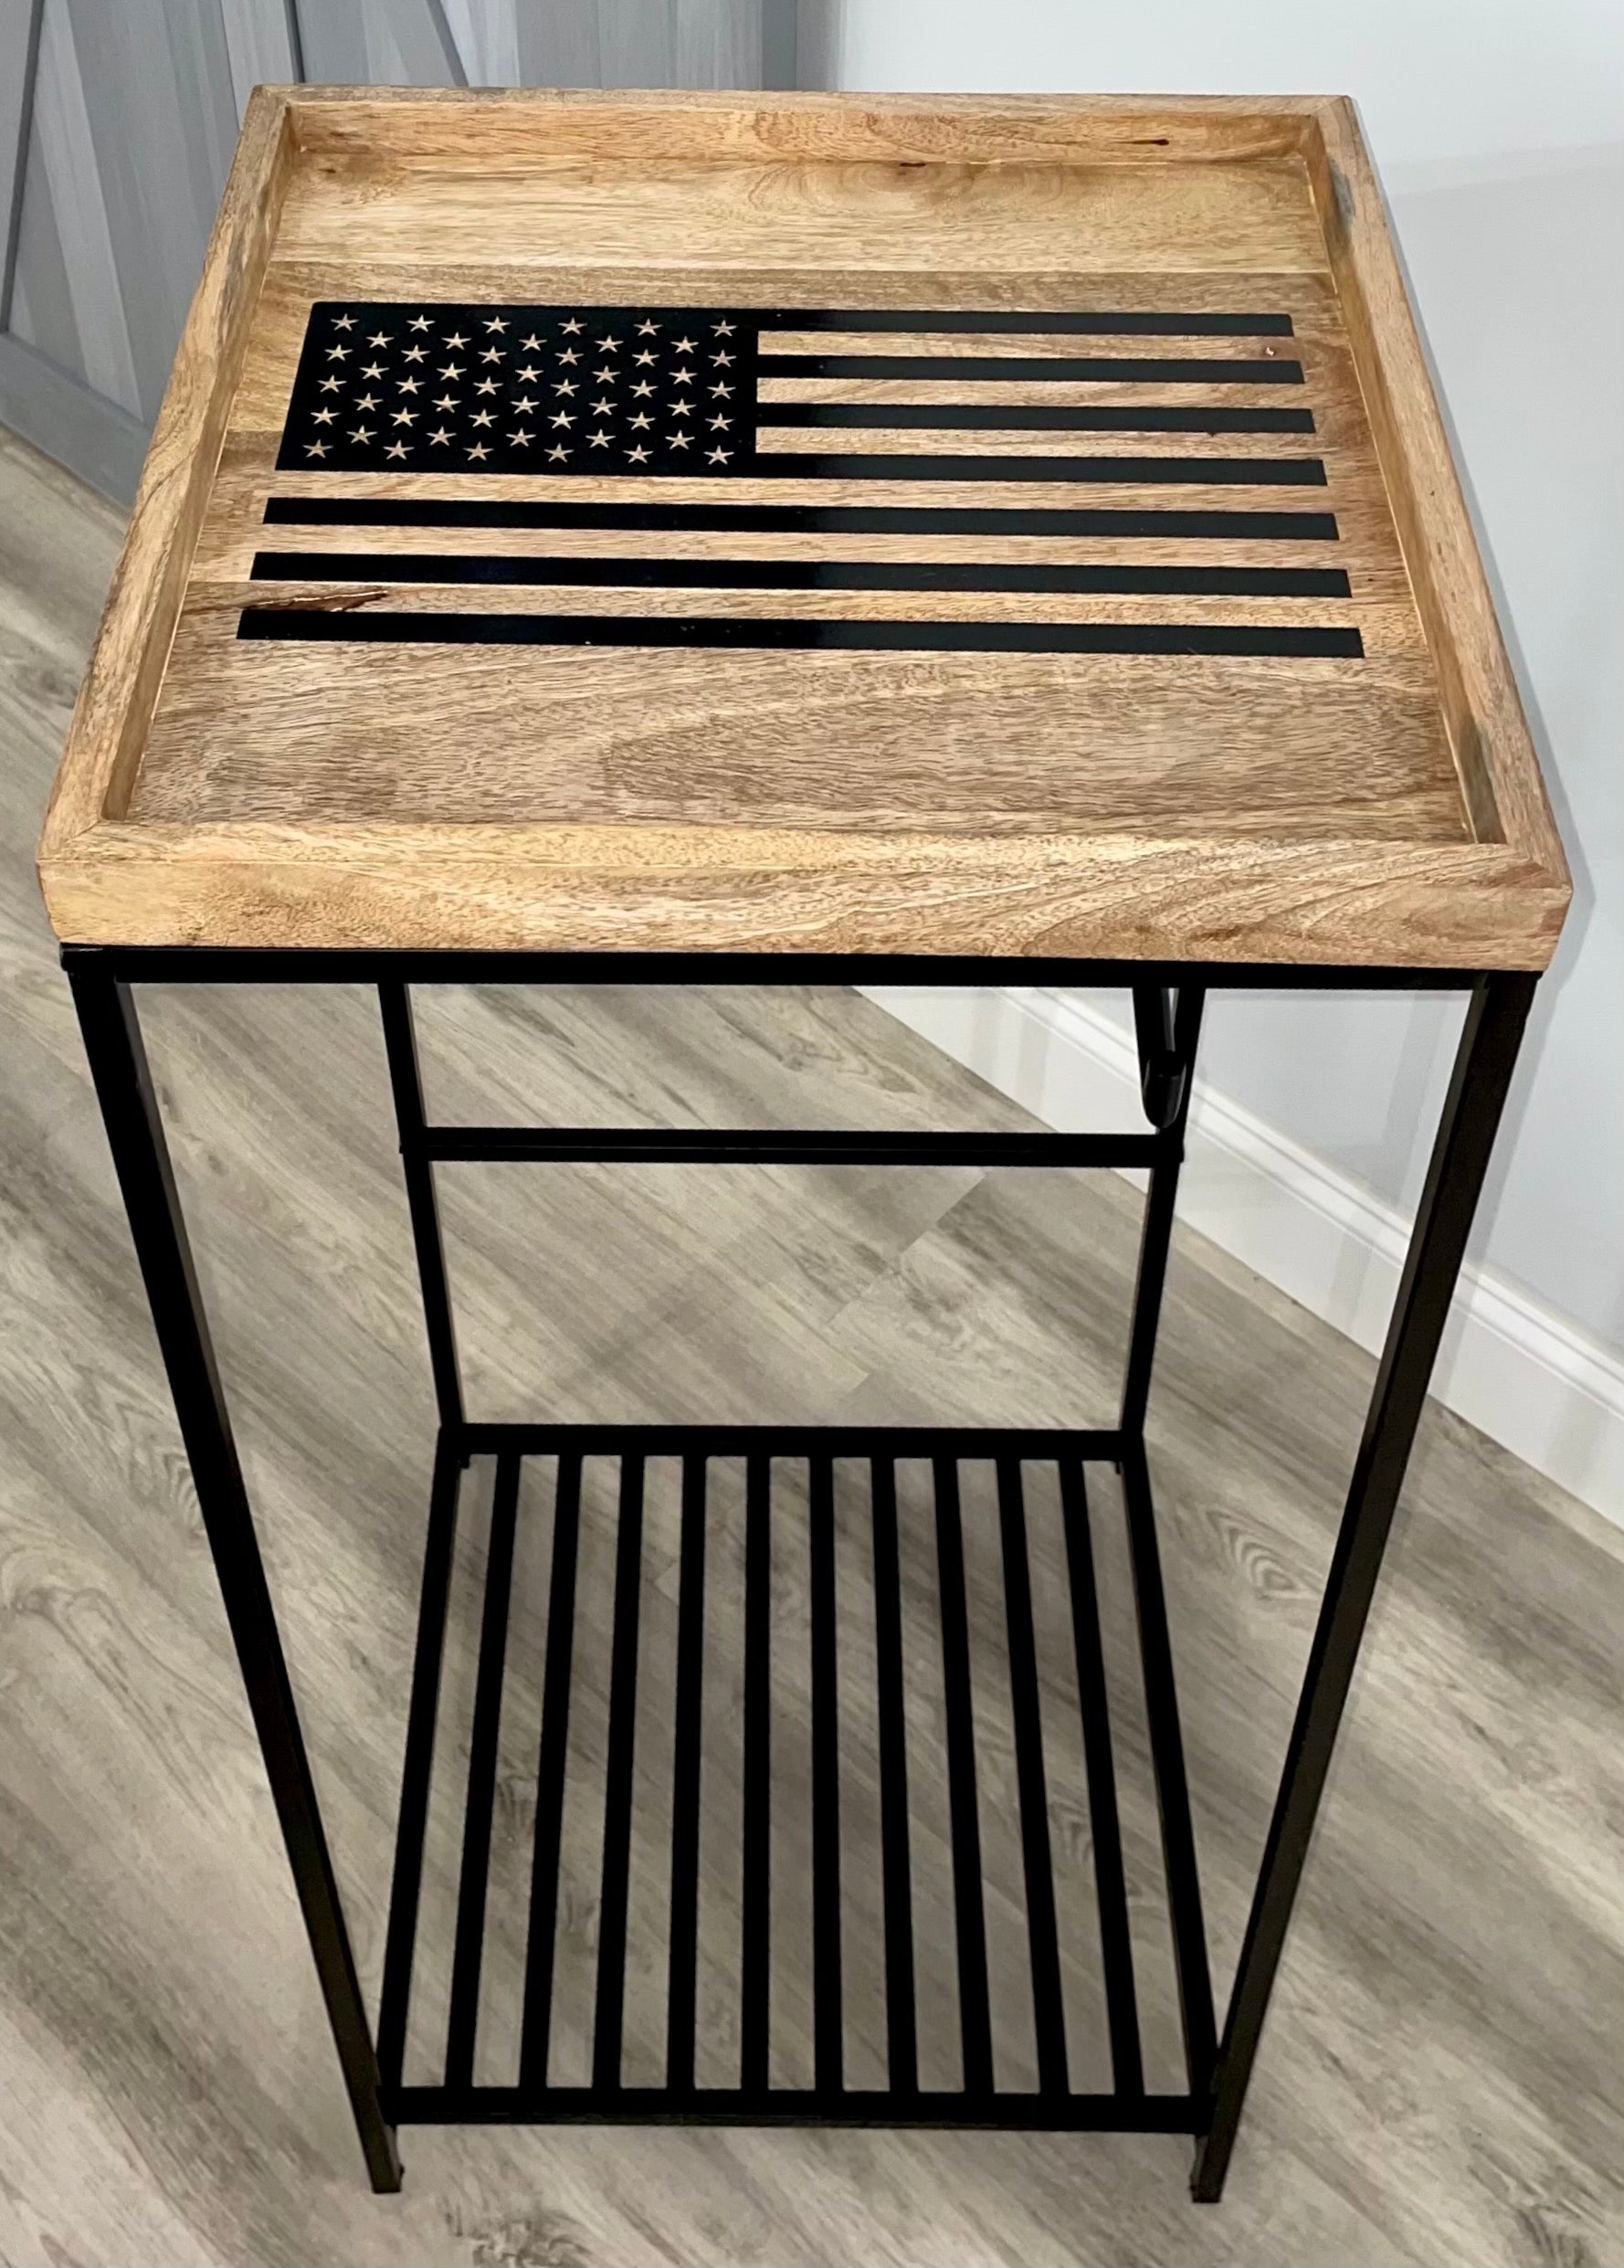 Police gear stand wood top with an American flag made out of quality mango wood. 